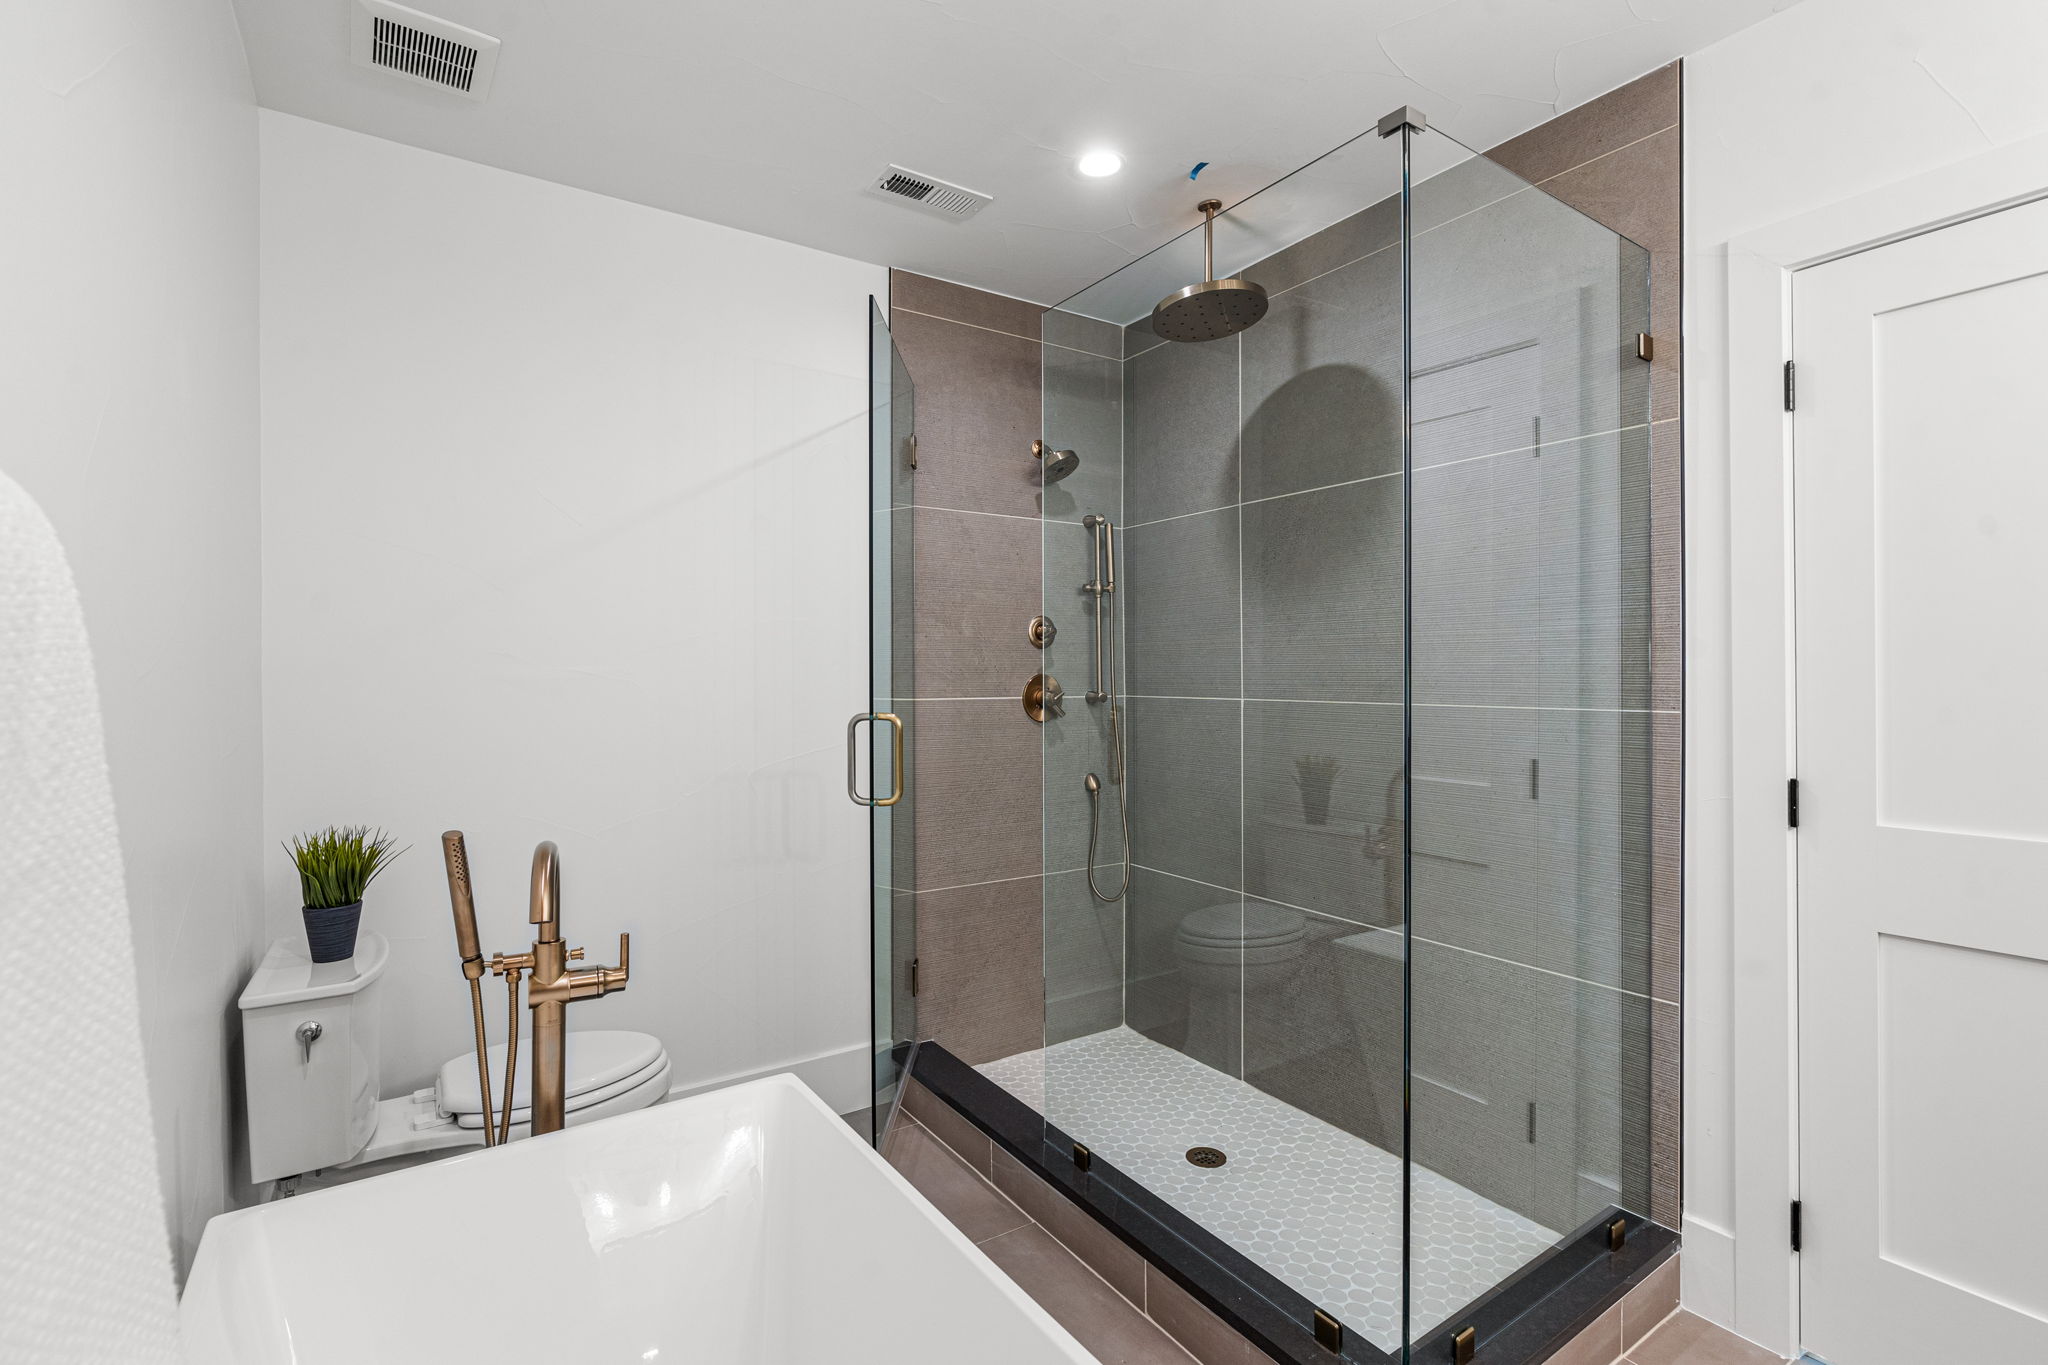 The spacious walk-in shower featuring a glass surround, large rain head, and handheld shower head